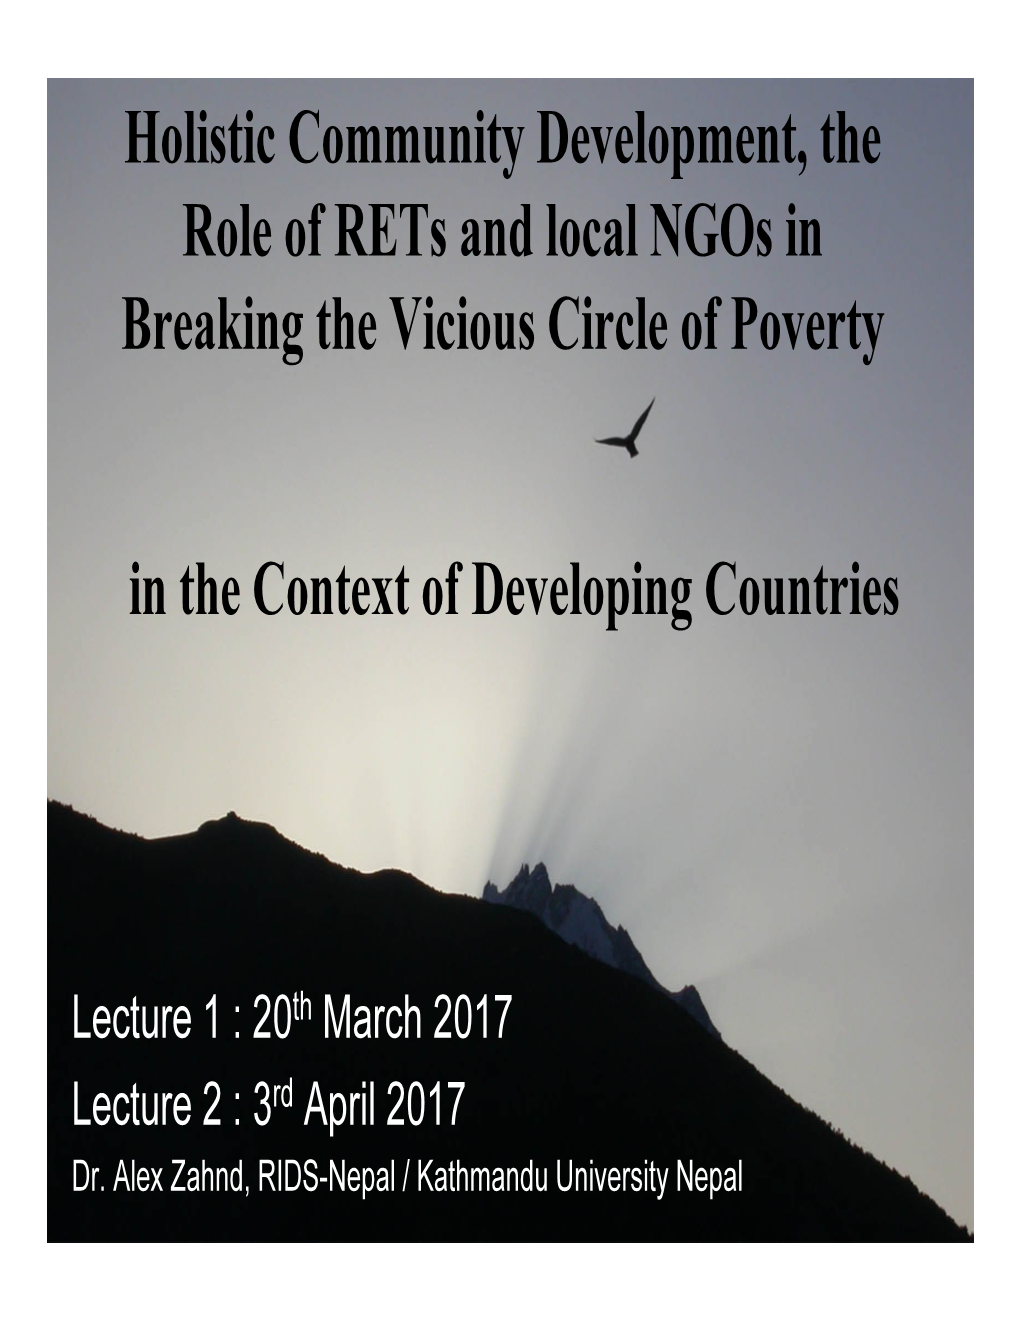 Holistic Community Development, the Role of Rets and Local Ngos in Breaking the Vicious Circle of Poverty